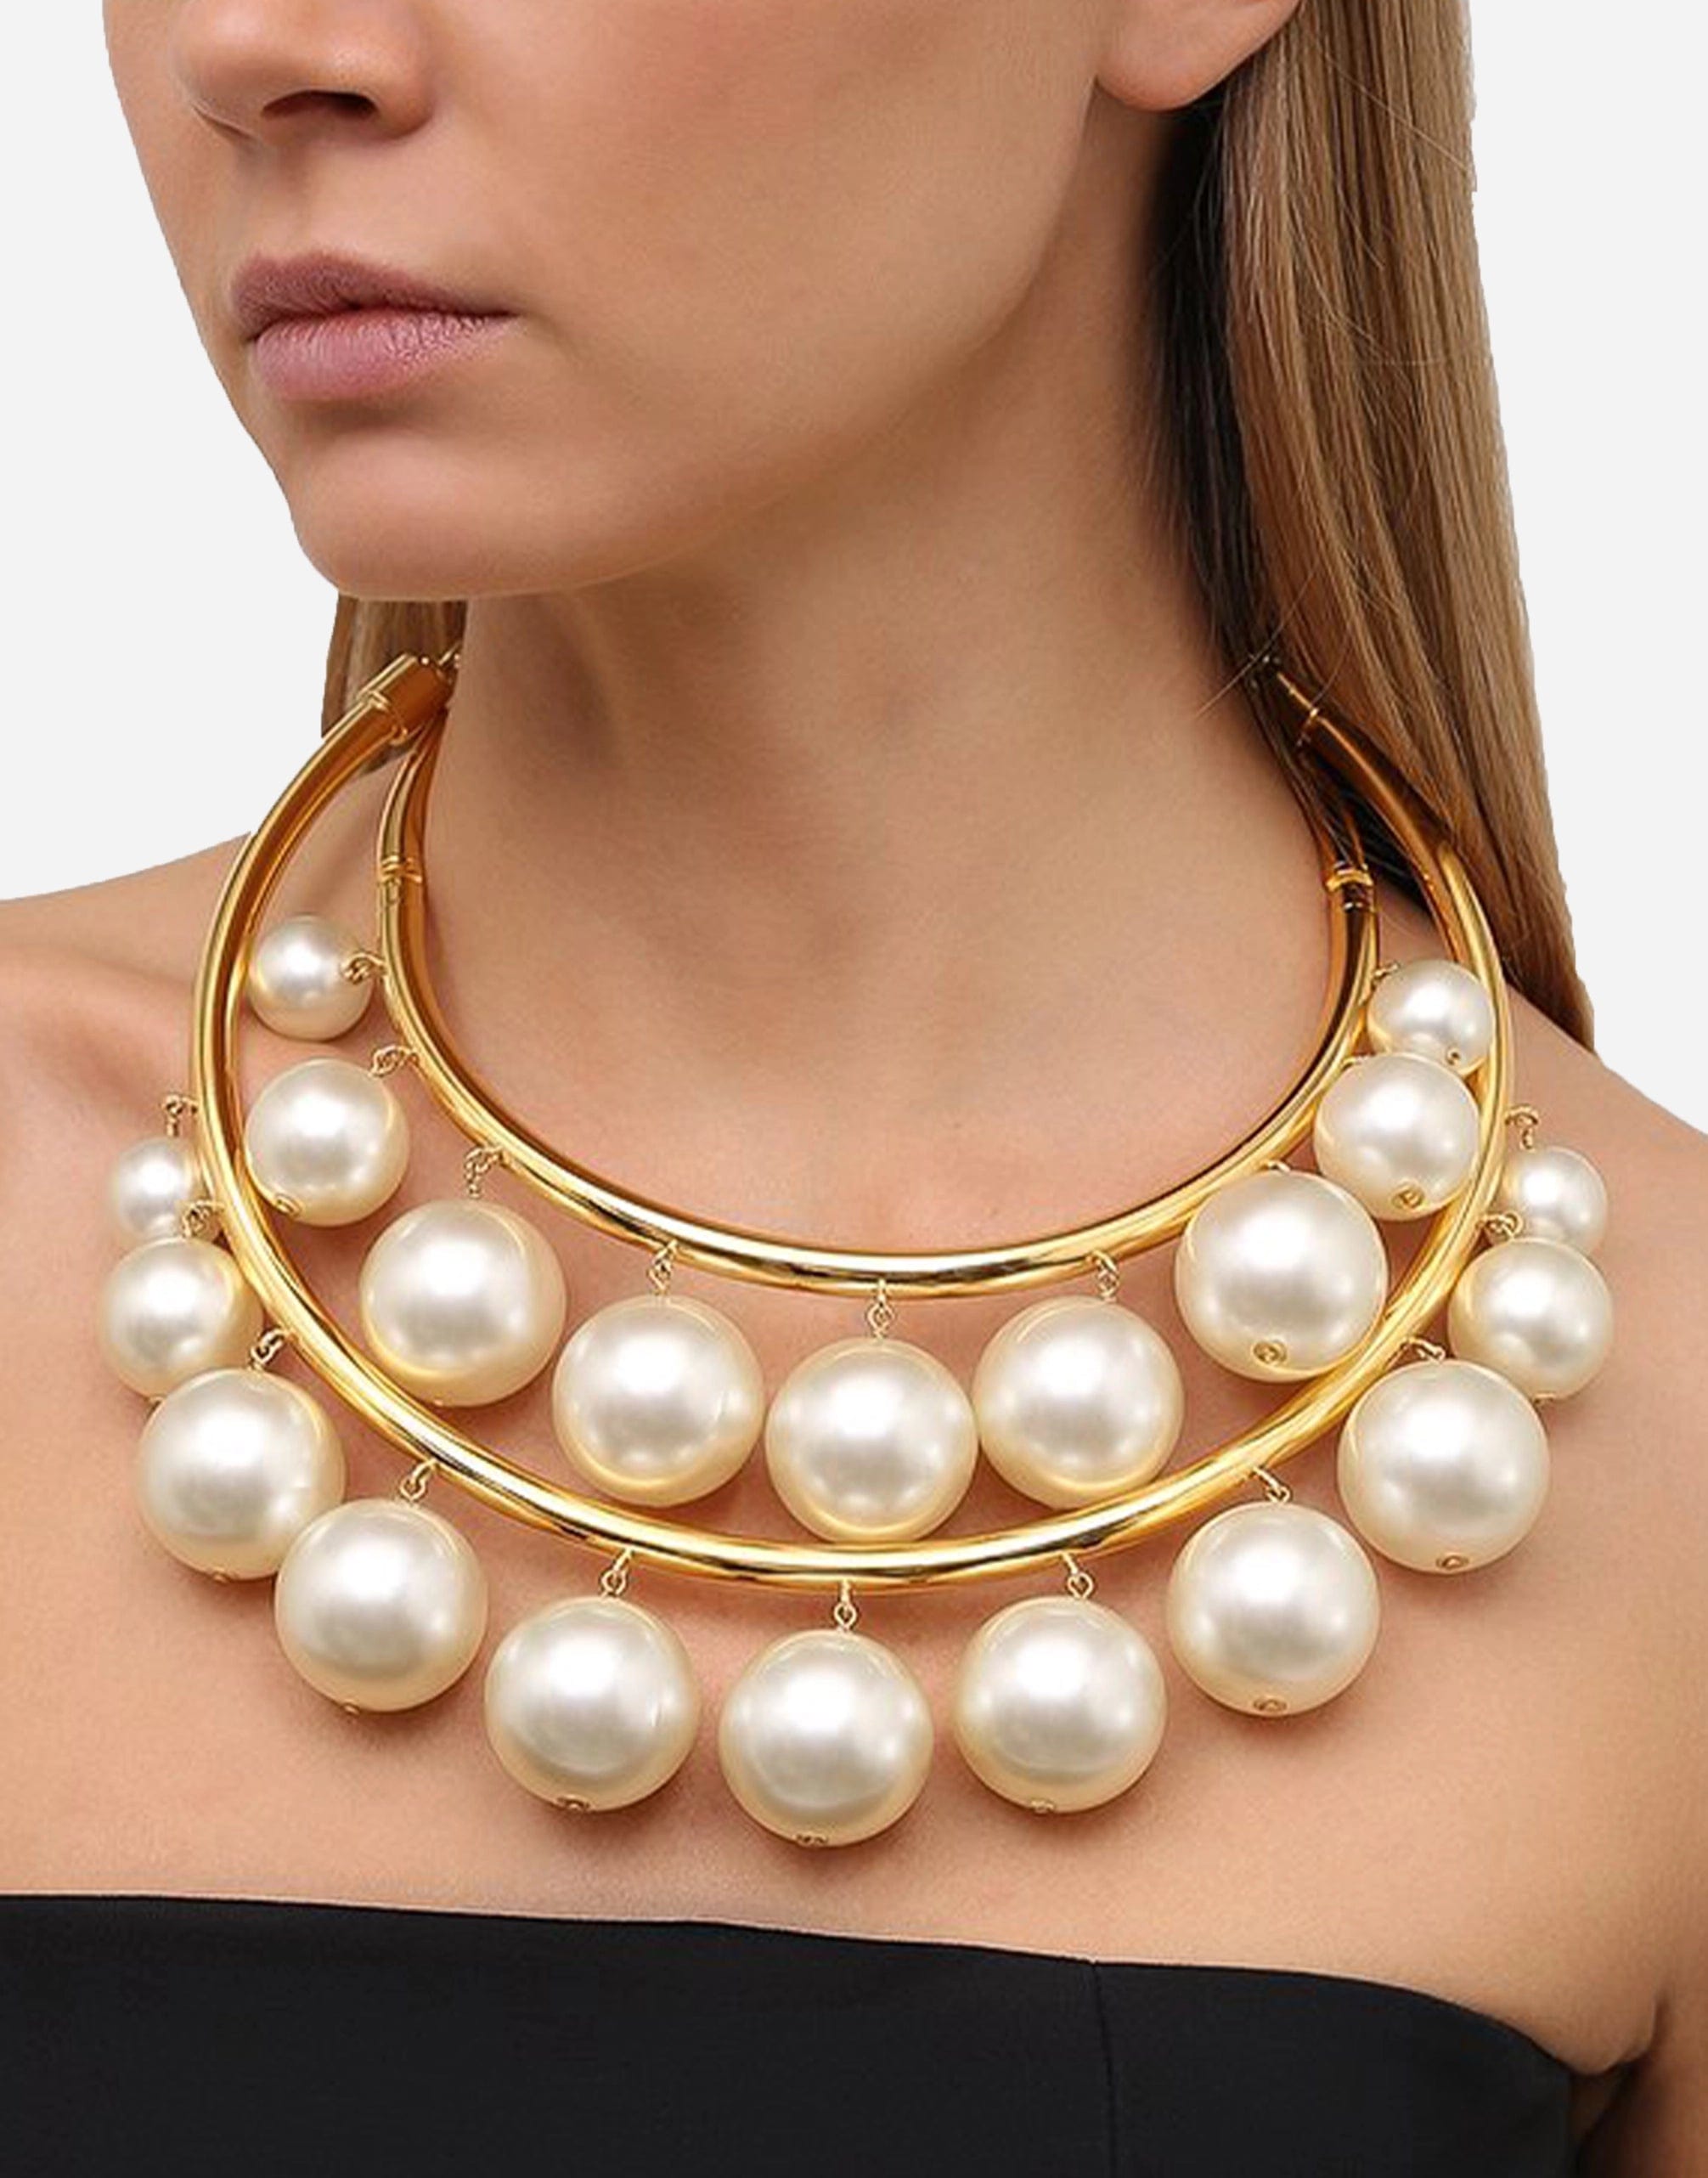 Dolce & Gabbana Faux Pearl-Embellished Choker Necklace